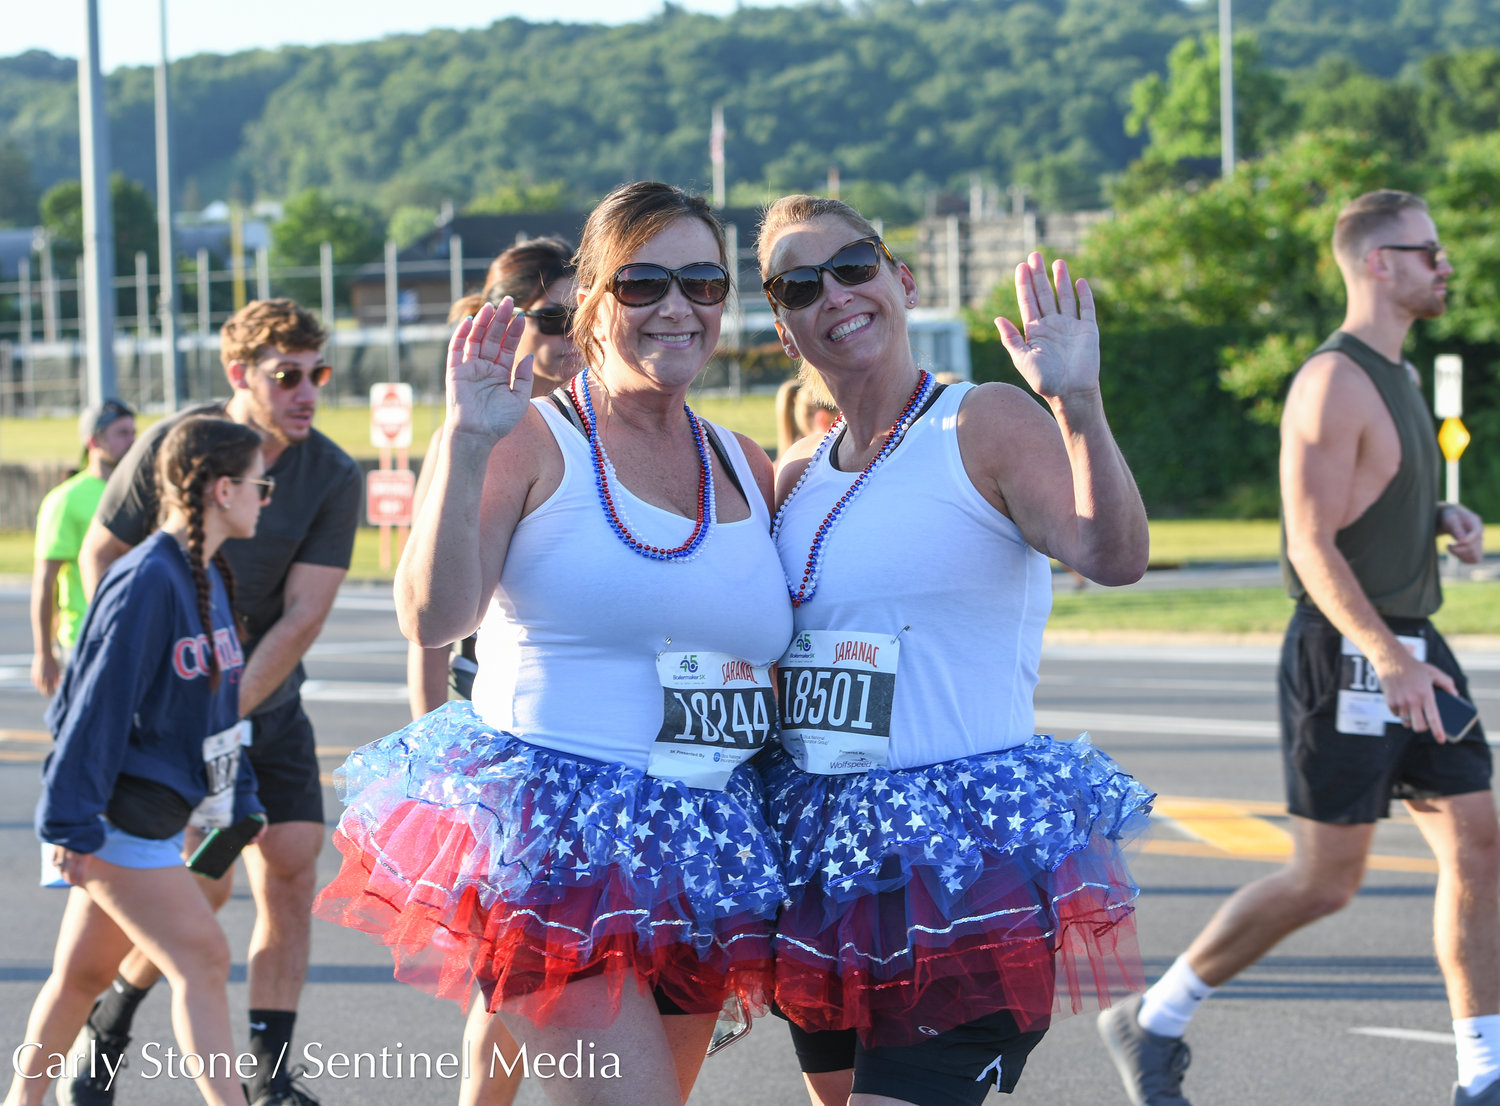 Pictured from left to right, Denise Serianni, of Whitesboro, and Sharon Thrasher, of New Hartford, dressed up to take on the 2022 Boilermaker 5K on Sunday, July 10.